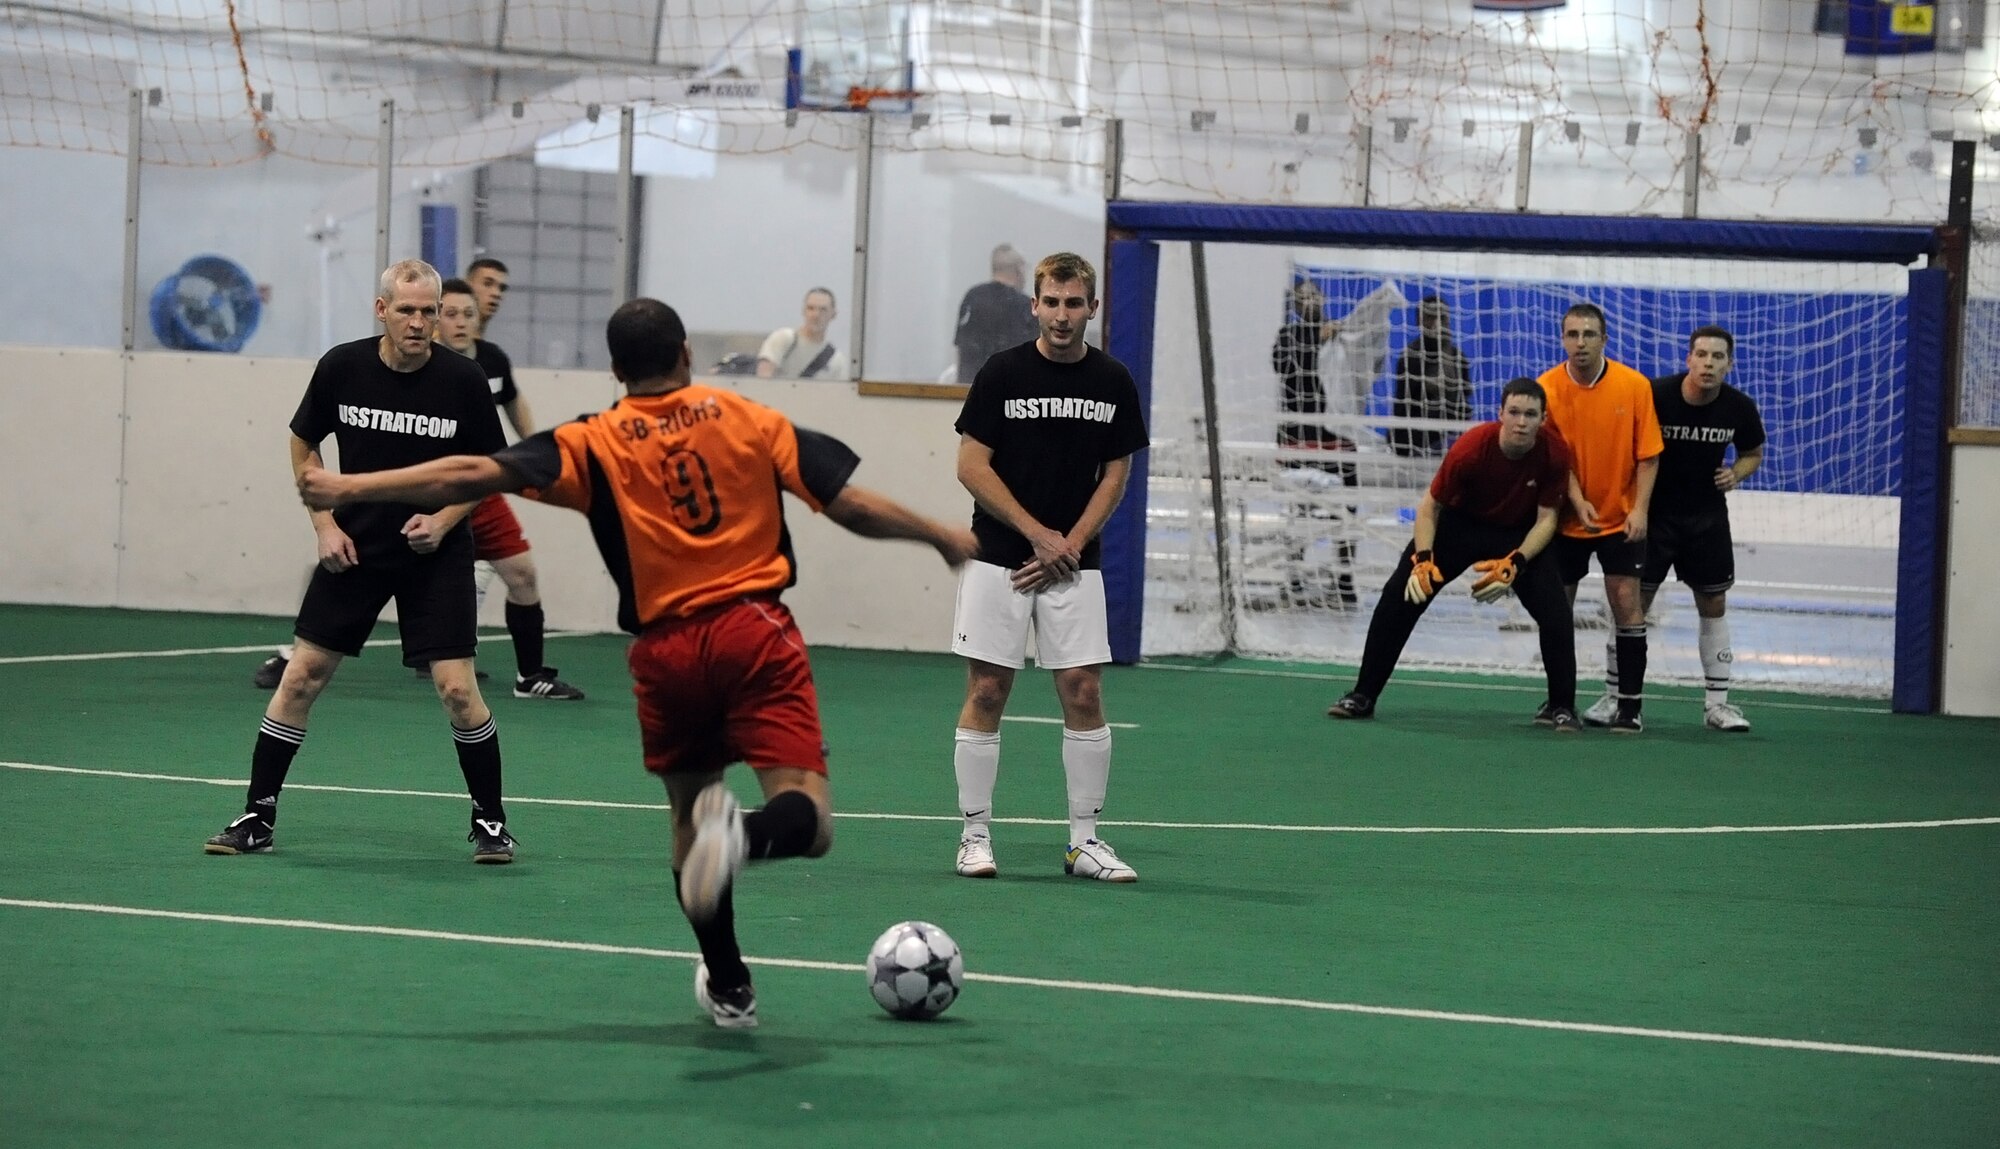 OFFUTT AIR FORCE BASE, Neb. -- Bryan Richardson, 55th Communications Group, takes a direct free kick during the intramural soccer championship game held at the Offutt Field House, Feb. 2.  The intramural soccer league ended with  U.S. Straegic Command defeating the 55th CG 4-1.

U.S. Air Force Photo by Josh Plueger
